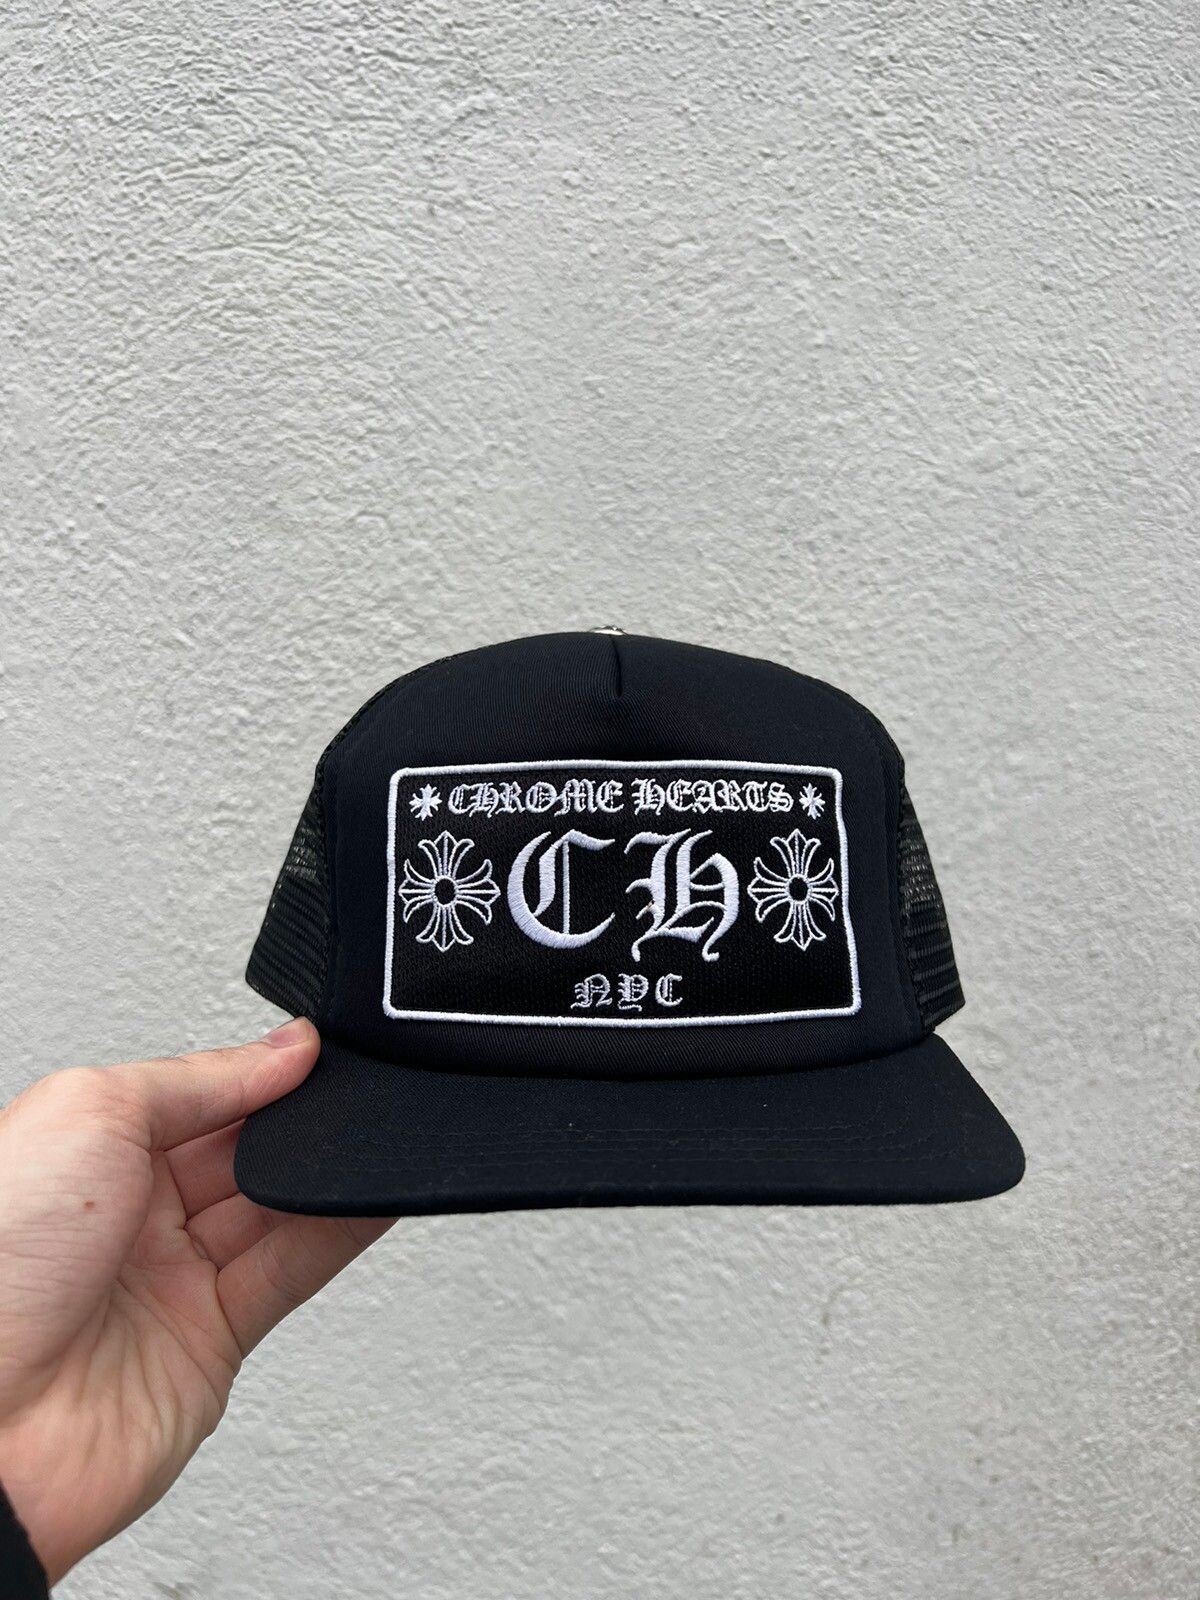 Pre-owned Chrome Hearts Nyc Black Trucker Snapback Hat